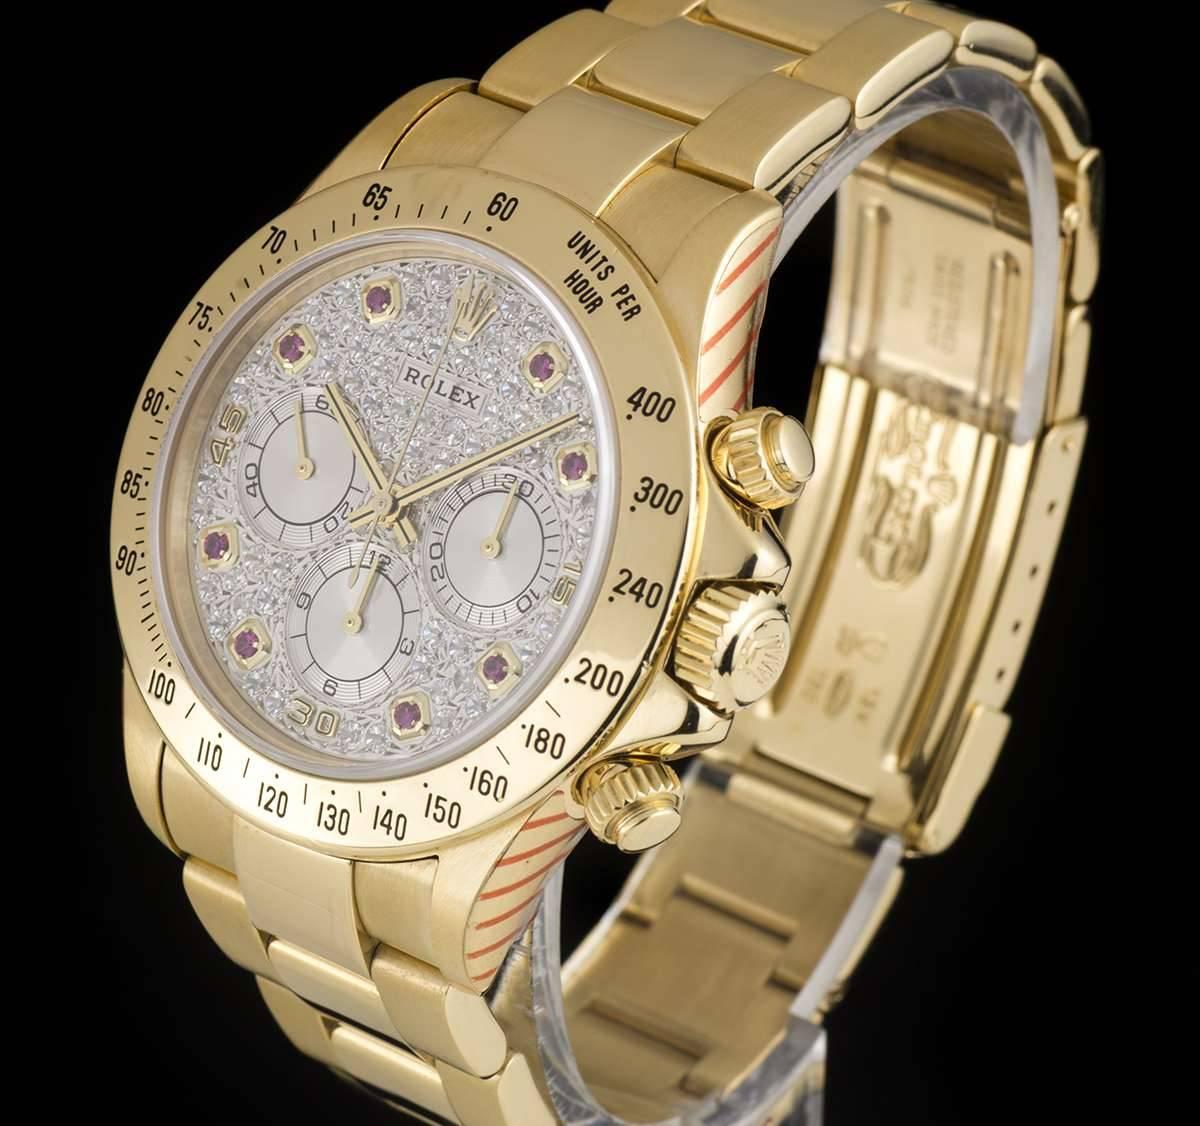 A Rare 18k Yellow Gold Oyster Perpetual Zenith Movement Cosmograph Daytona Gents Wristwatch, pave diamond dial with 8 applied ruby hour markers, 30 minute recorder at 3 0'clock, 12 hour recorder at 6 0'clock, small seconds at 9 0'clock, a fixed 18k